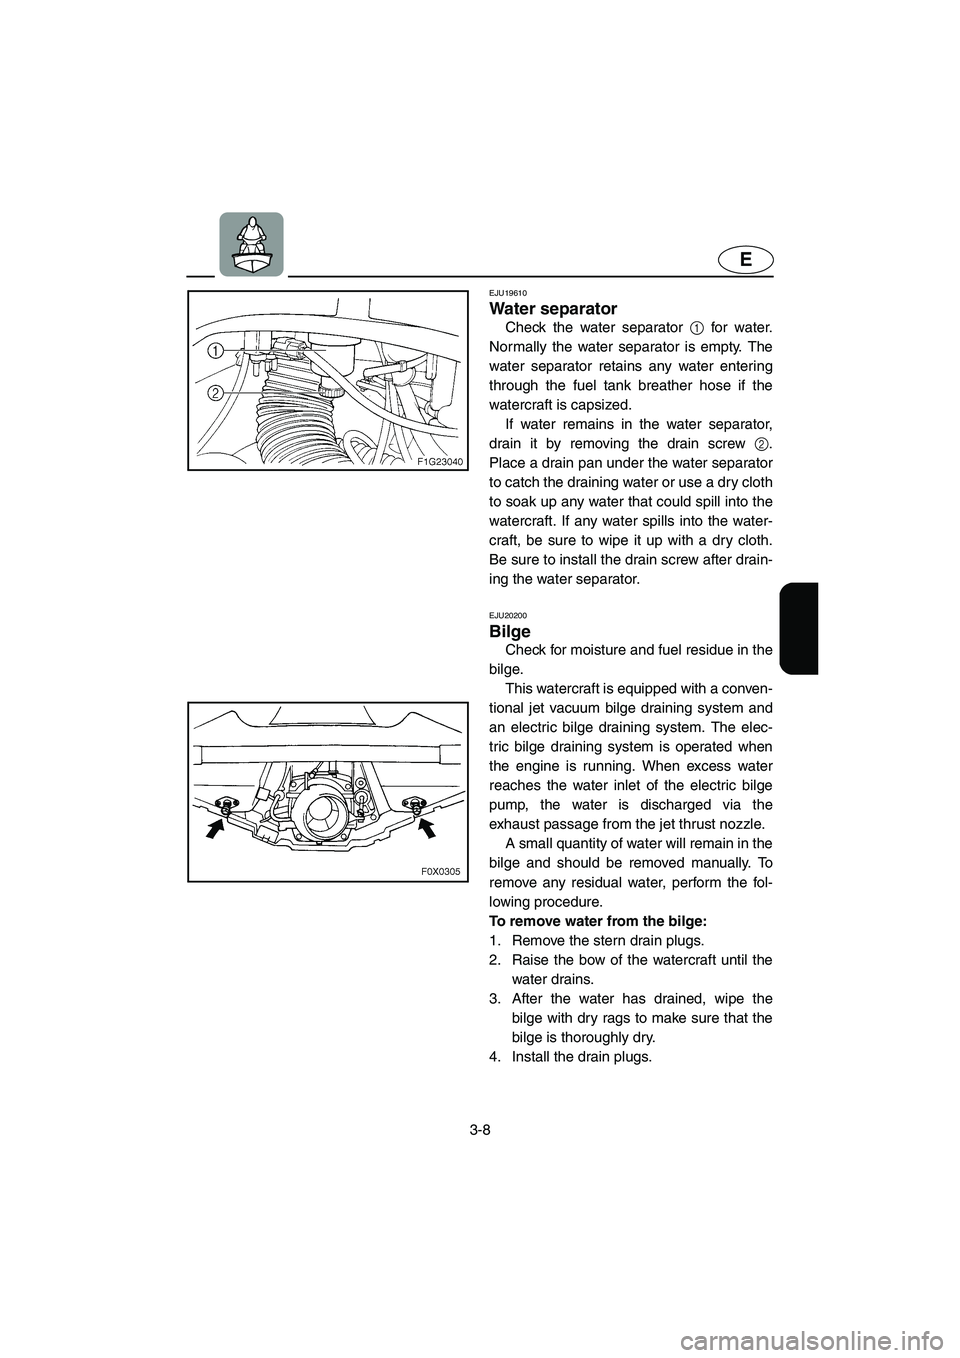 YAMAHA GP1300R 2003 User Guide 3-8
E
EJU19610 
Water separator 
Check the water separator 1 for water.
Normally the water separator is empty. The
water separator retains any water entering
through the fuel tank breather hose if the